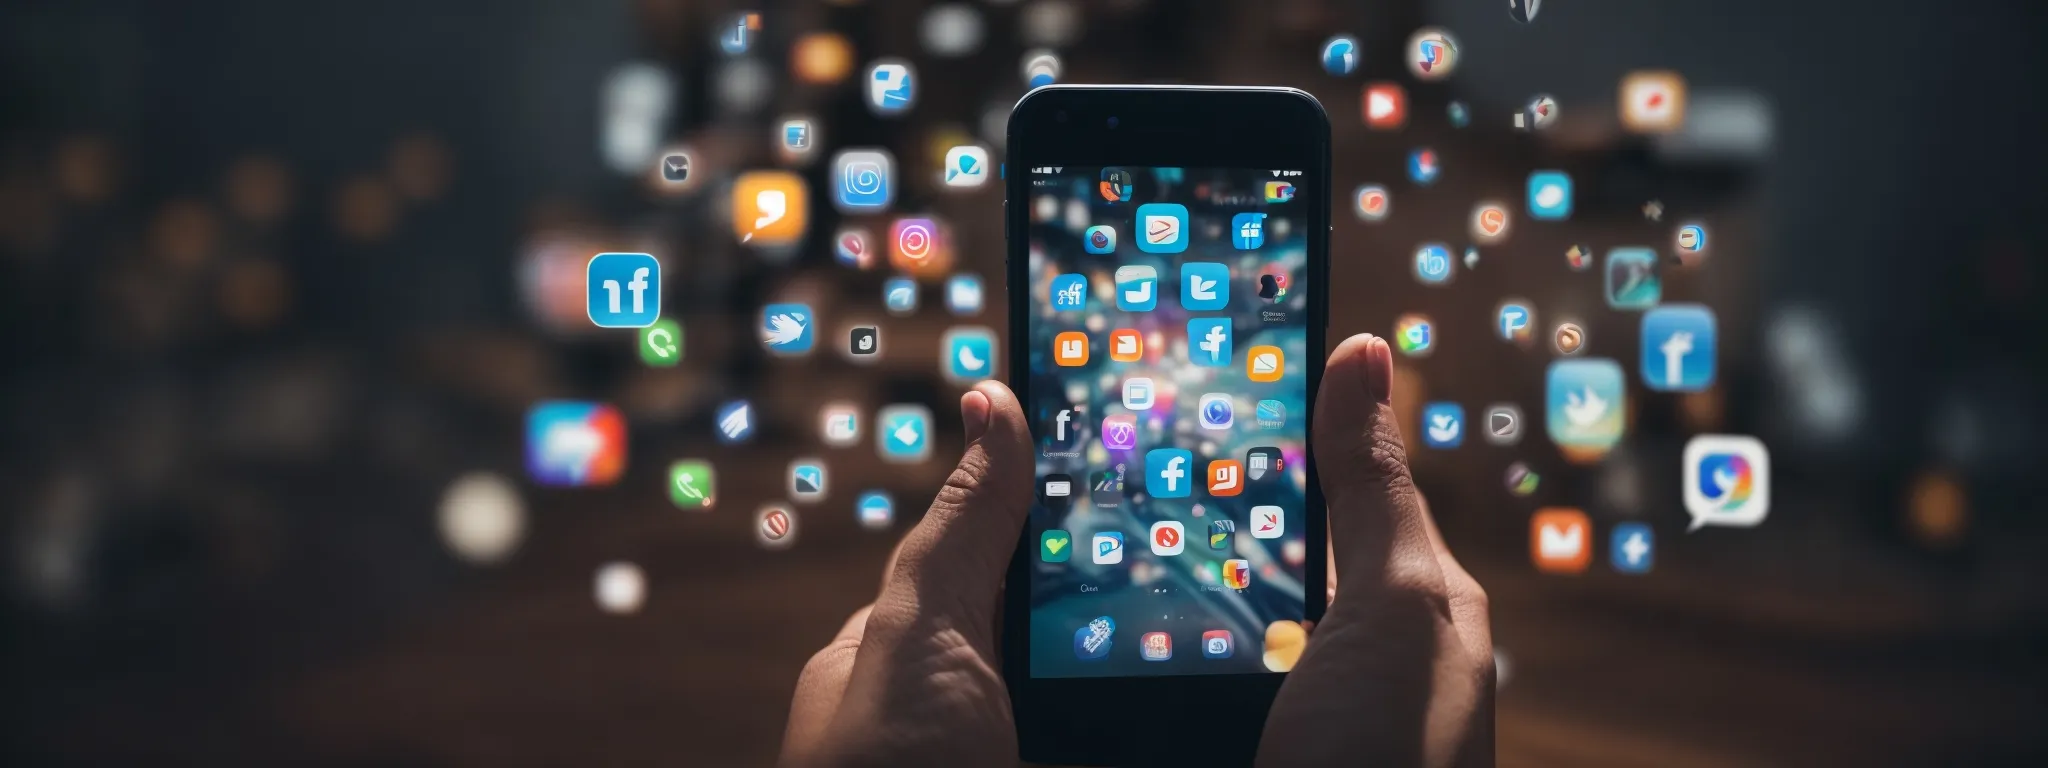 a person holding a smartphone with various social media app icons radiating outward, symbolizing content sharing and reach.